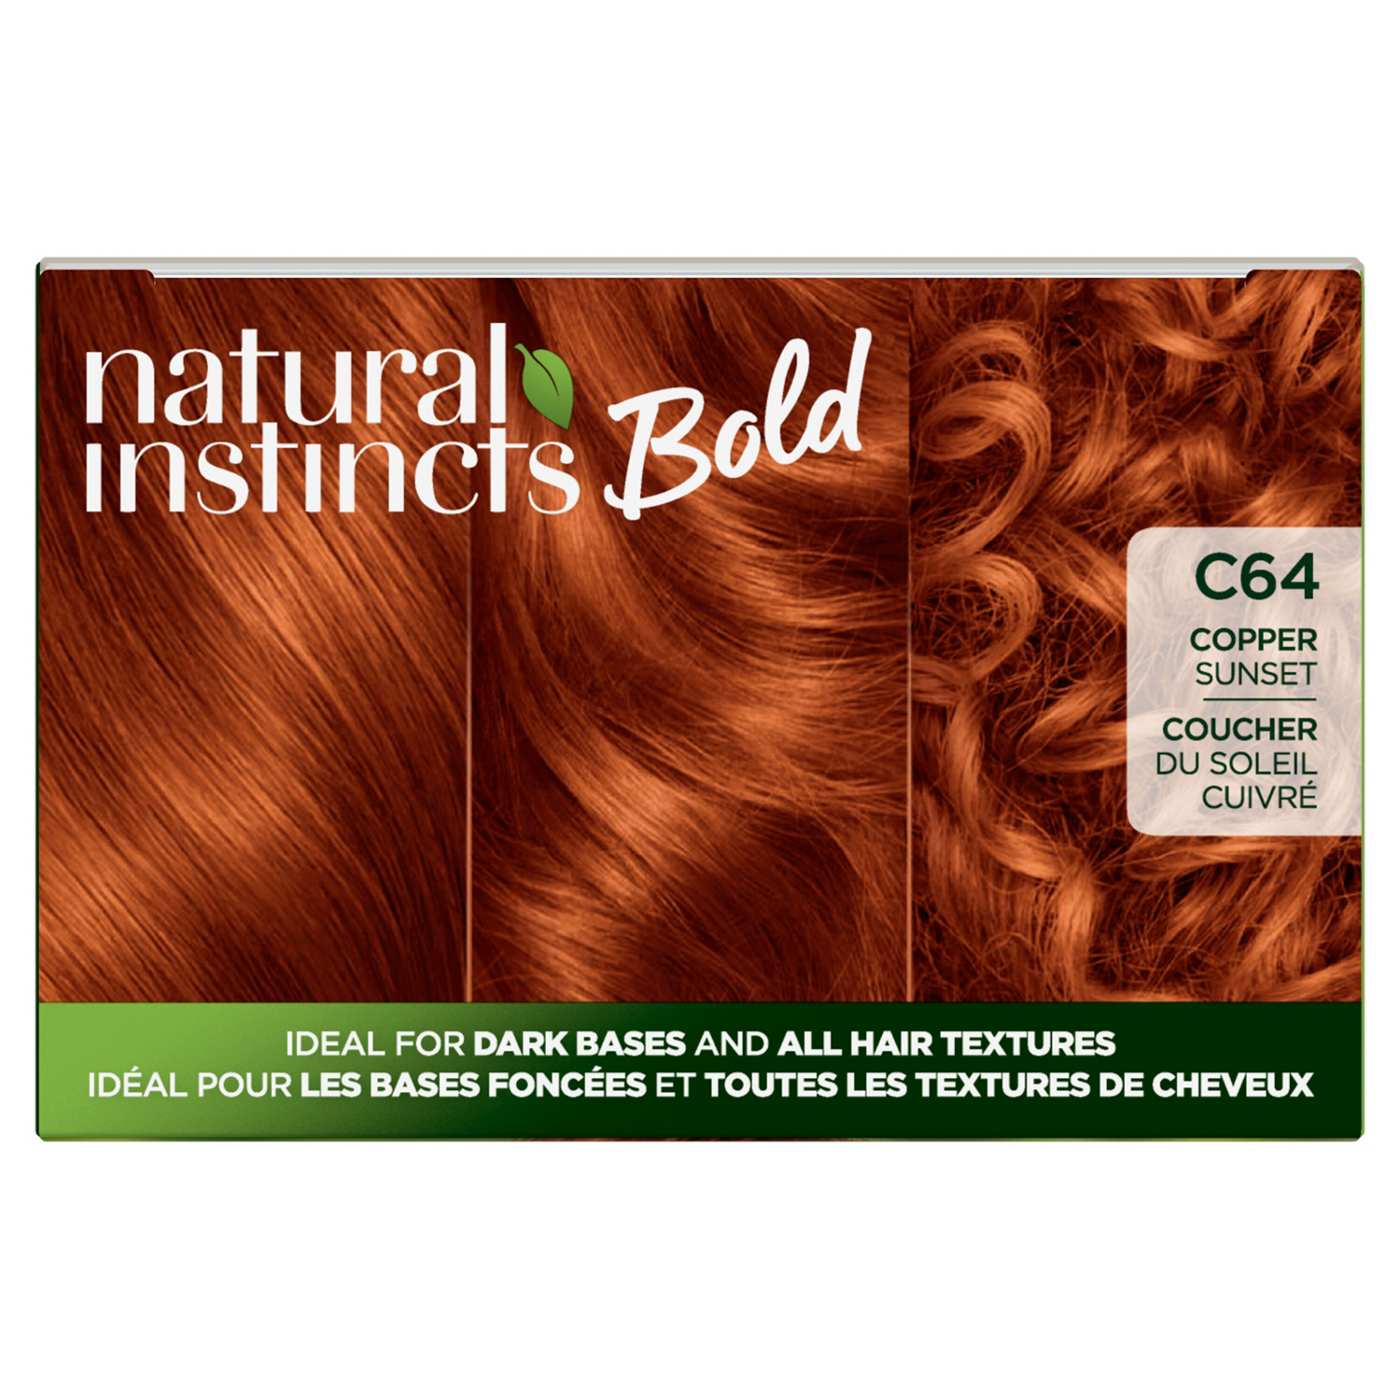 Clairol Natural Instincts Bold Permanent Hair Color - C64 Copper Sunset ; image 3 of 6